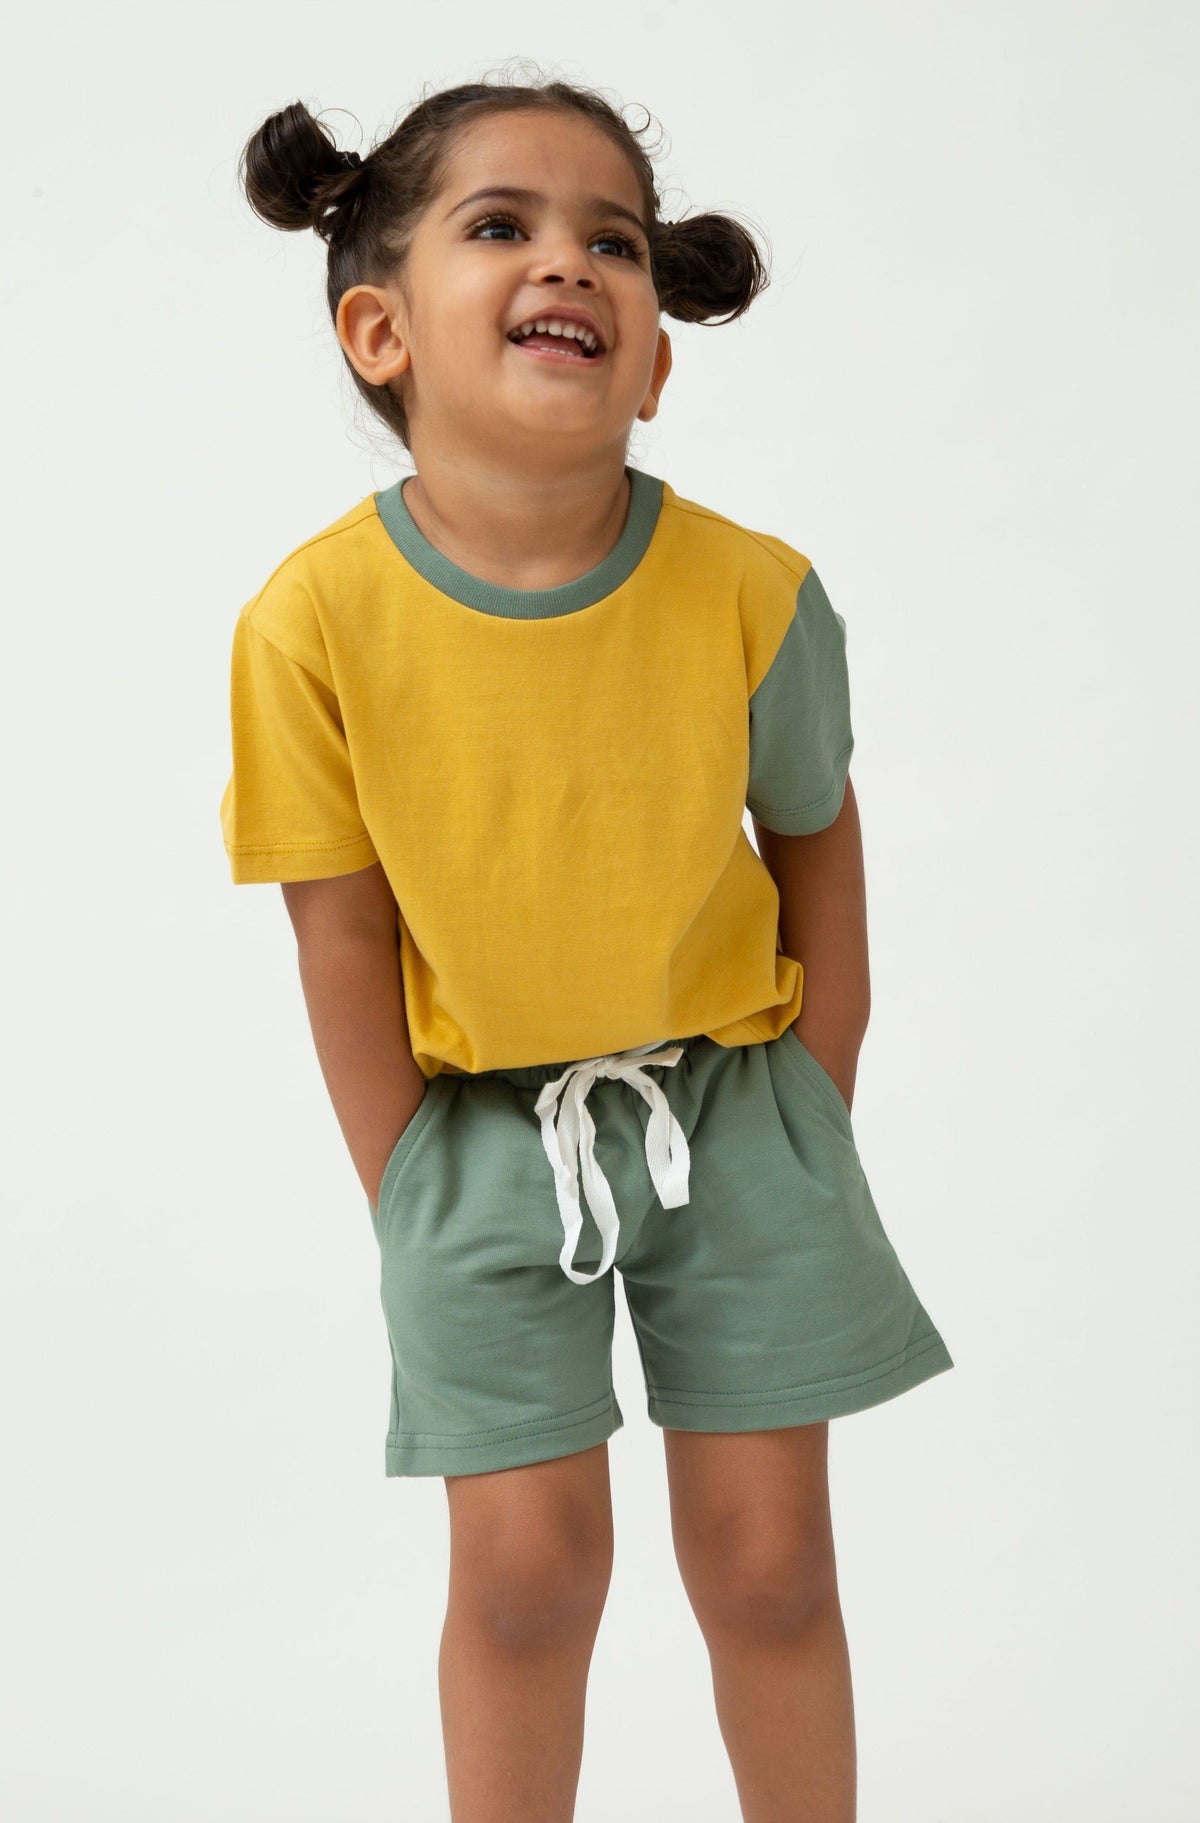 Saltpetre Set of half sleeve yellow t-shirt with green colour blocked sleeve and green pants or shorts with pockets for kids, in combination set, for casual and party wear